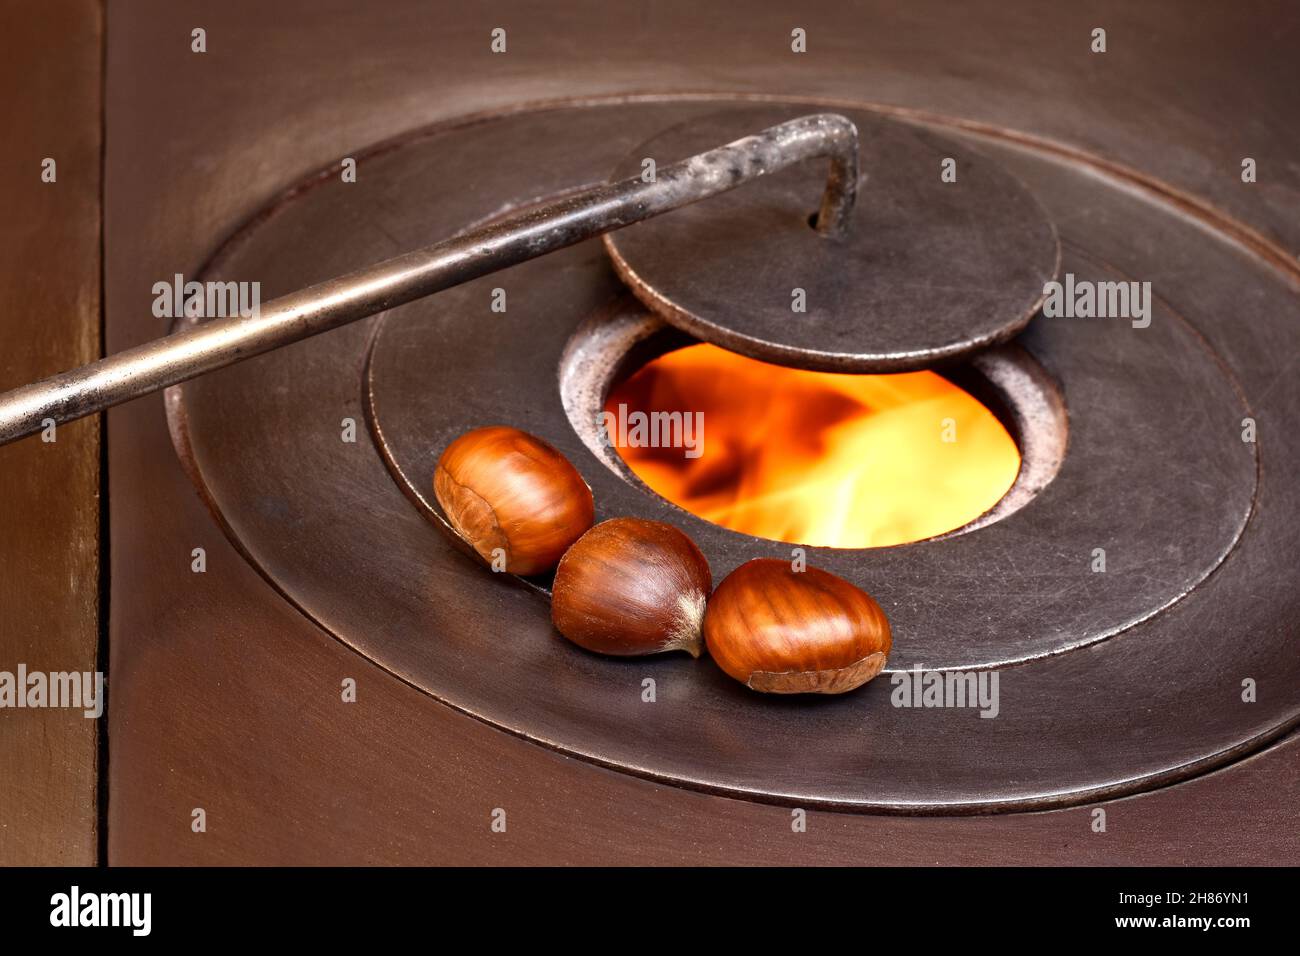 Close-up of three chestnuts over a fire in a wood stove.The photo represents something typical of the autumn season and is taken in horizontal format. Stock Photo